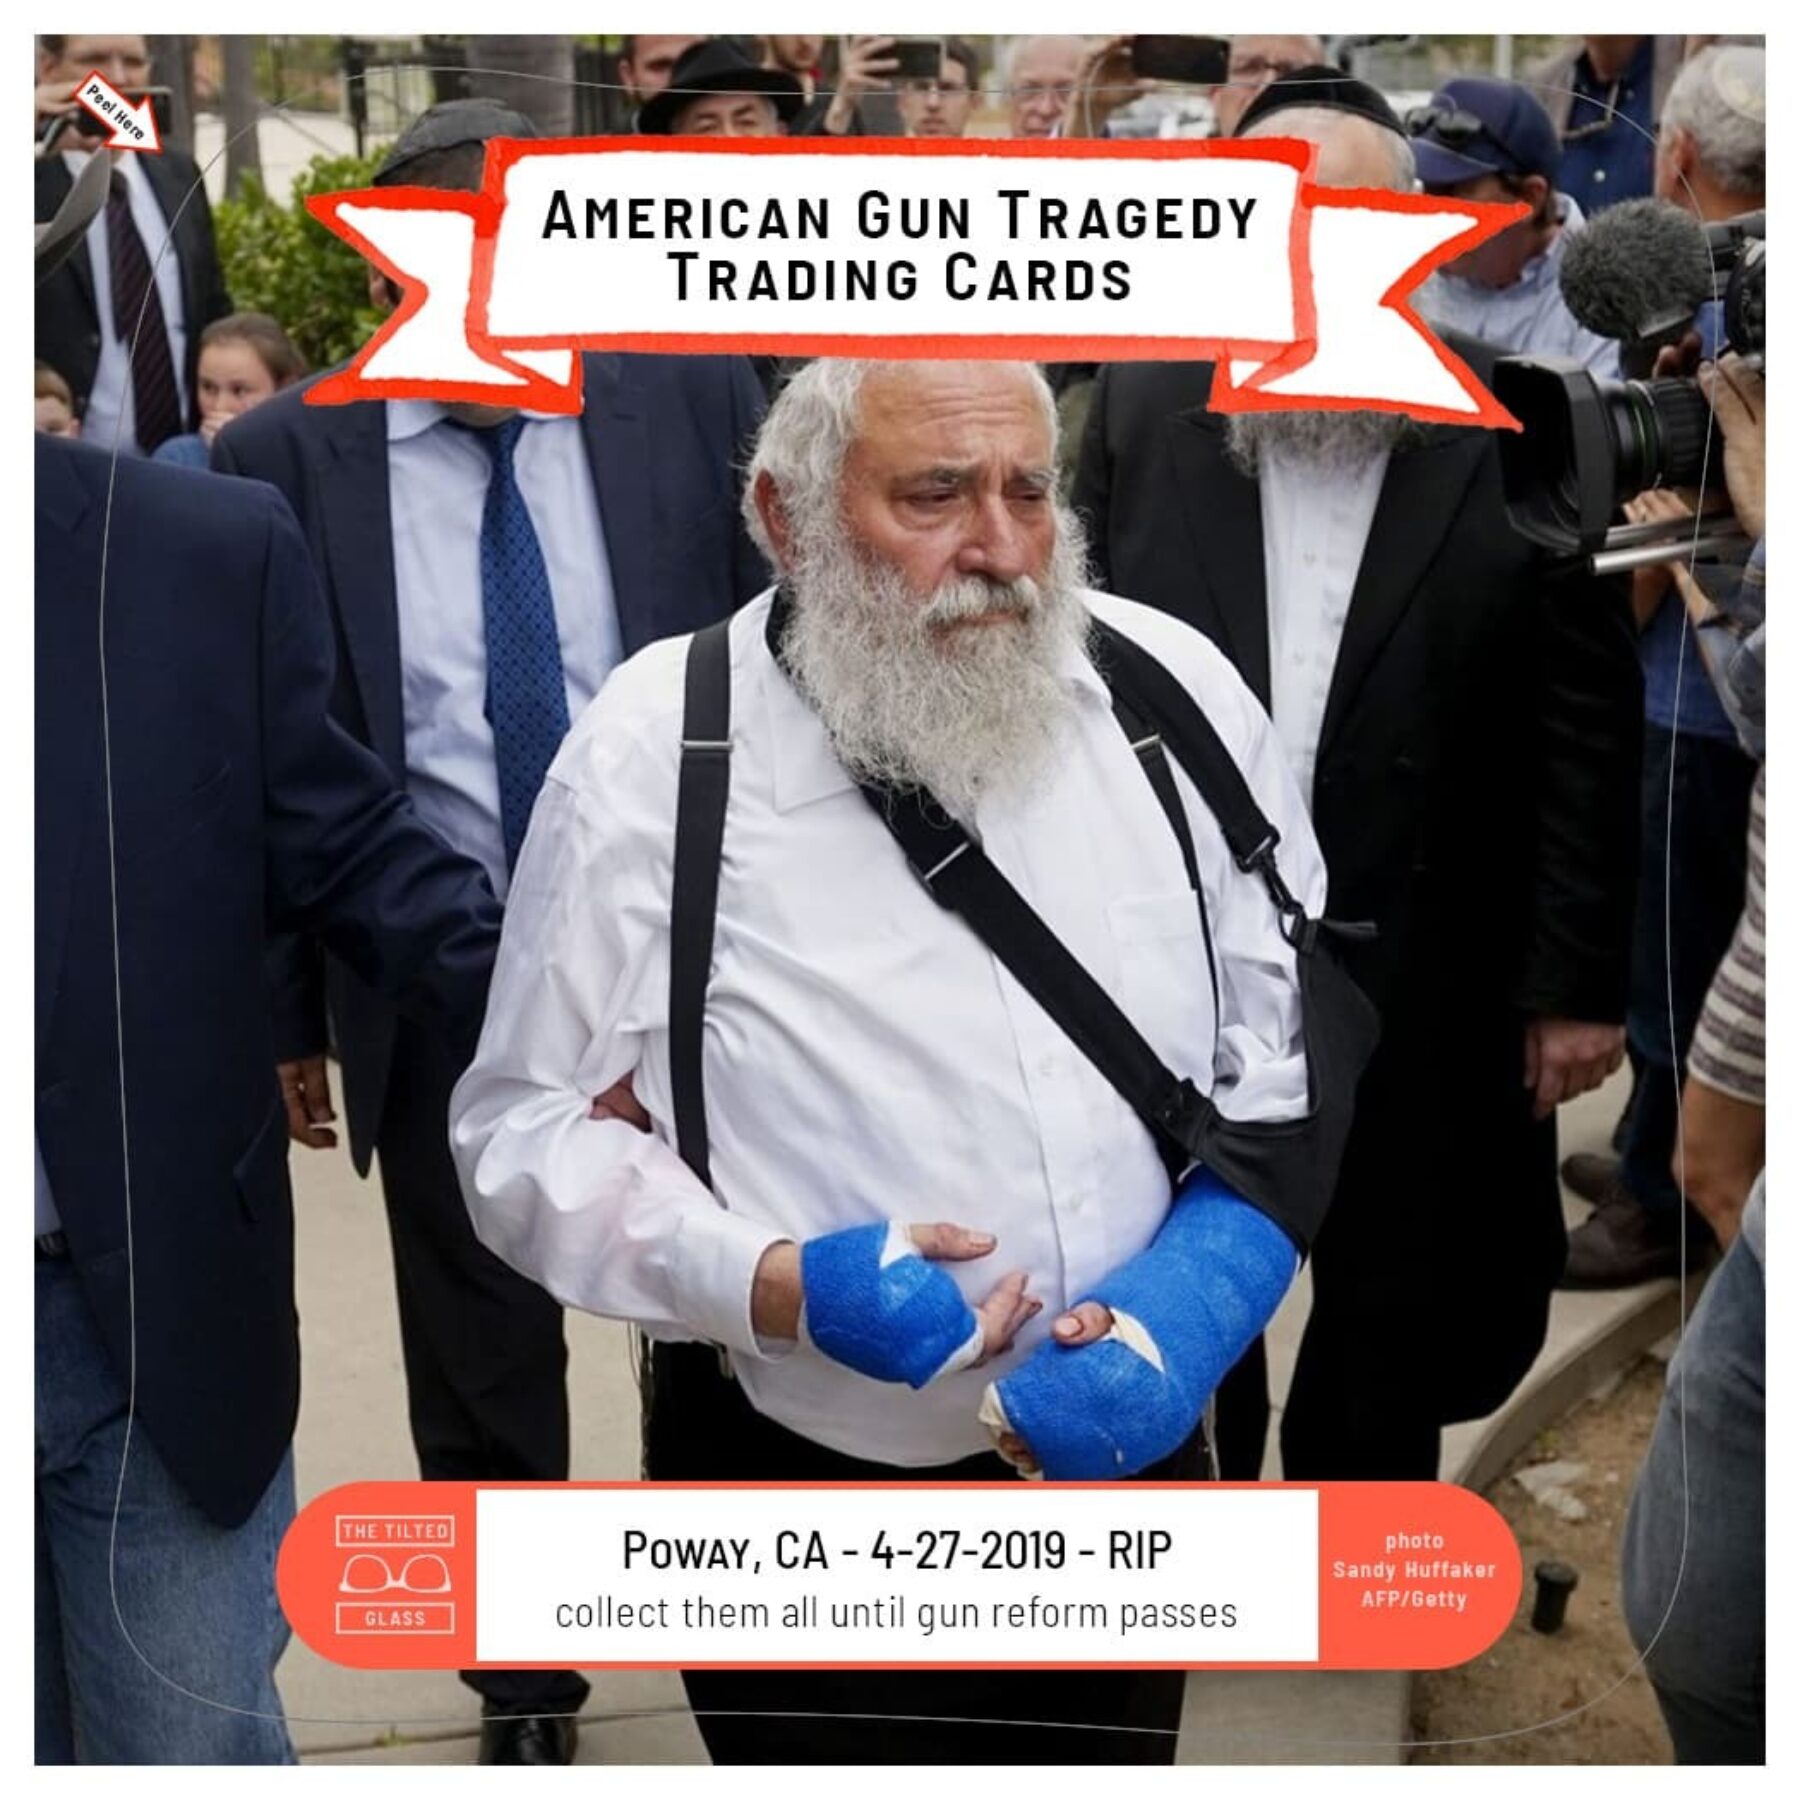 American Gun Tragedy Trading Cards - 4-27-2019 - Chabad of Poway Synagogue